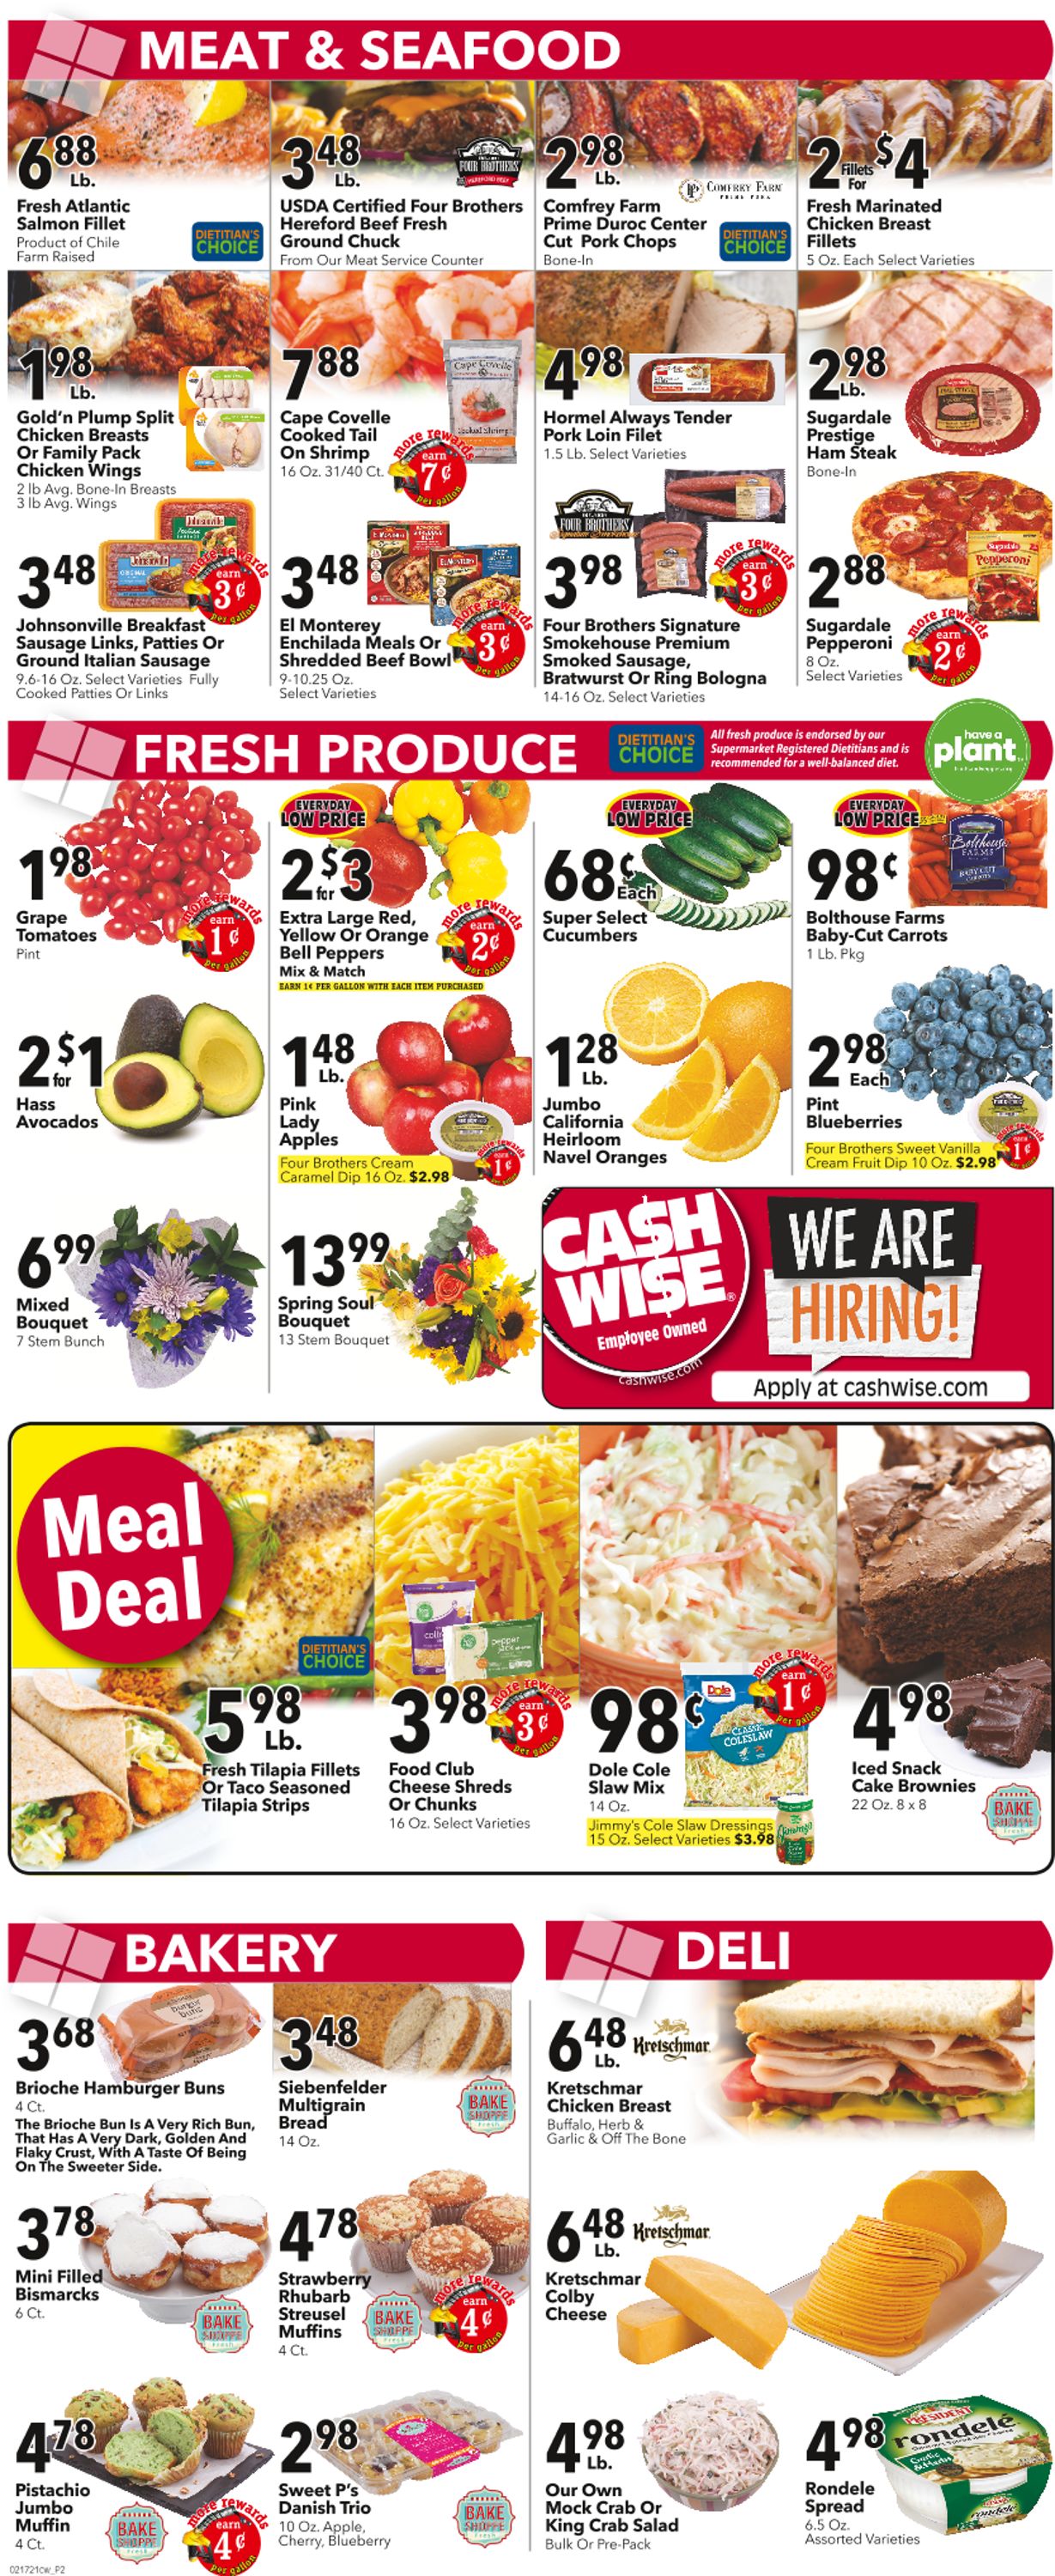 Cash Wise Weekly Ad Circular - valid 02/17-02/23/2021 (Page 2)